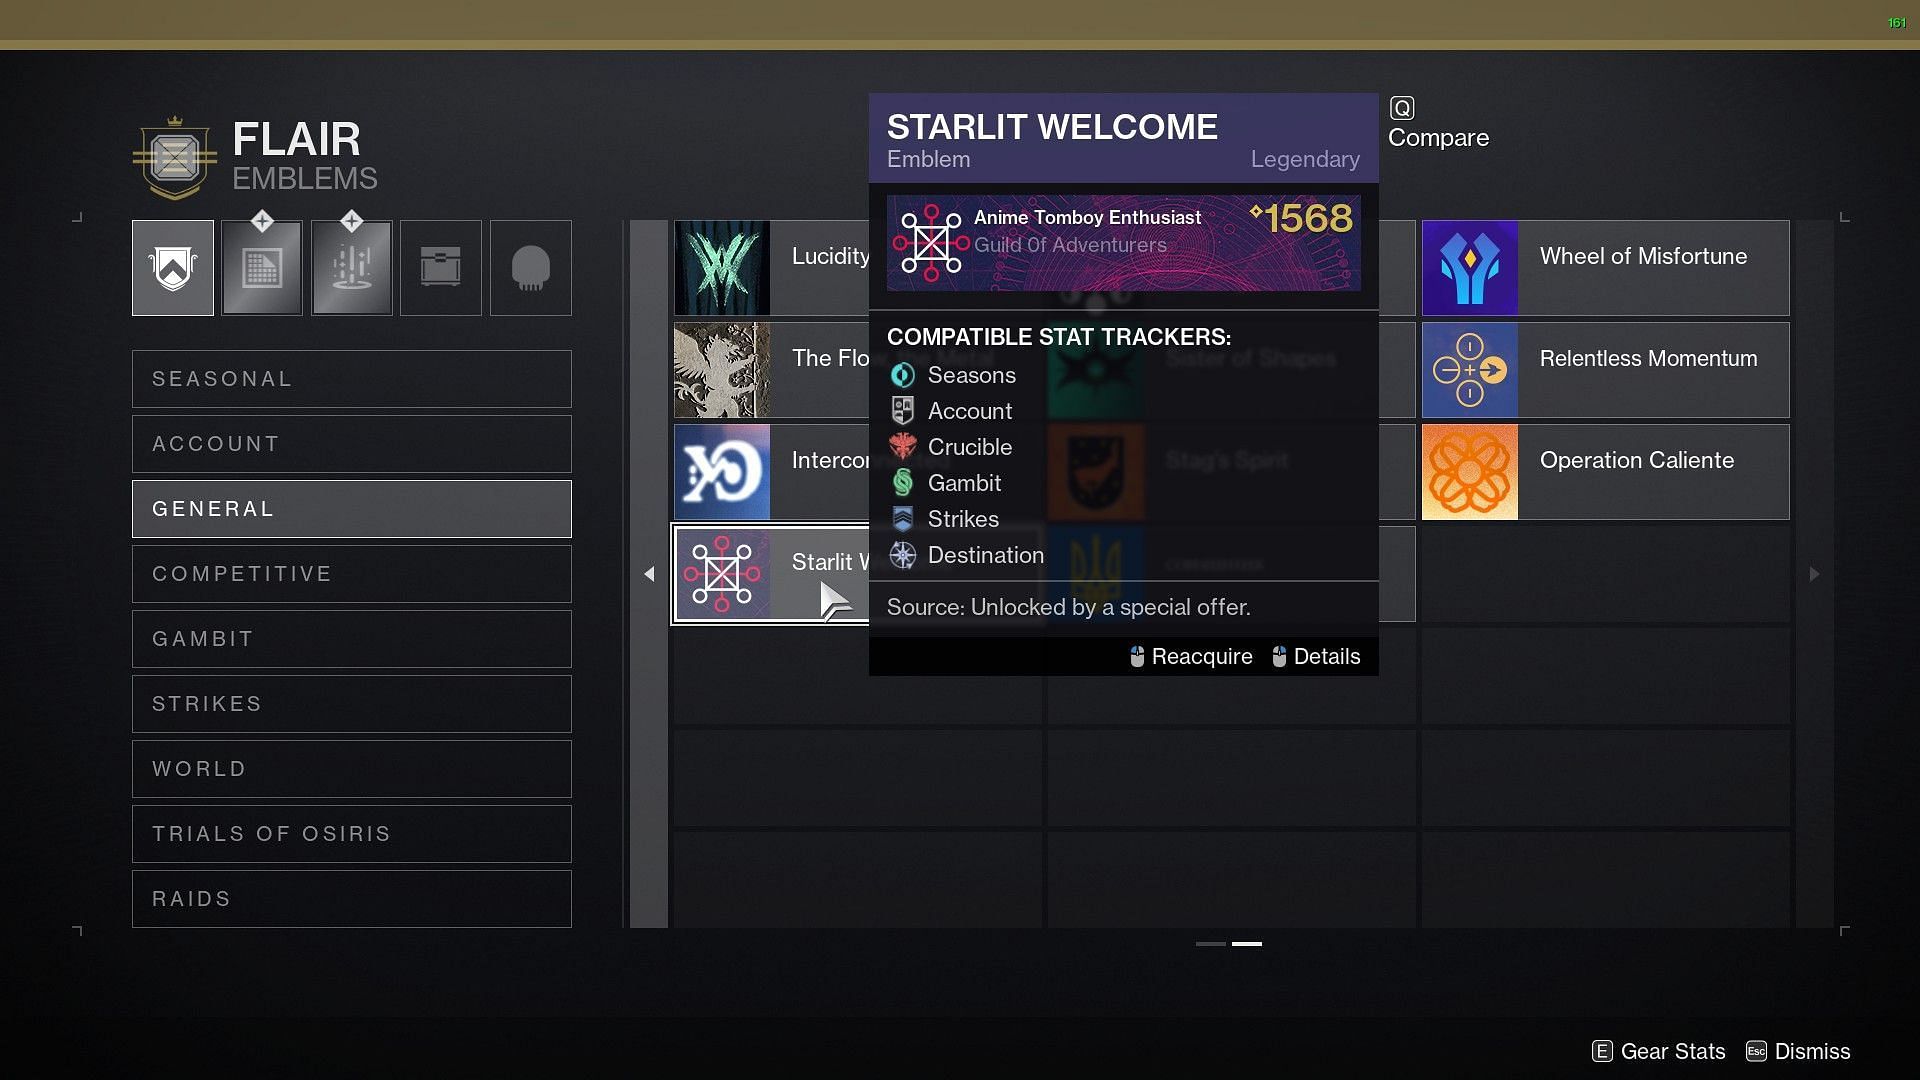 The Starlit Welcome emblem in Destiny 2 is now claimable (Image via Bungie)